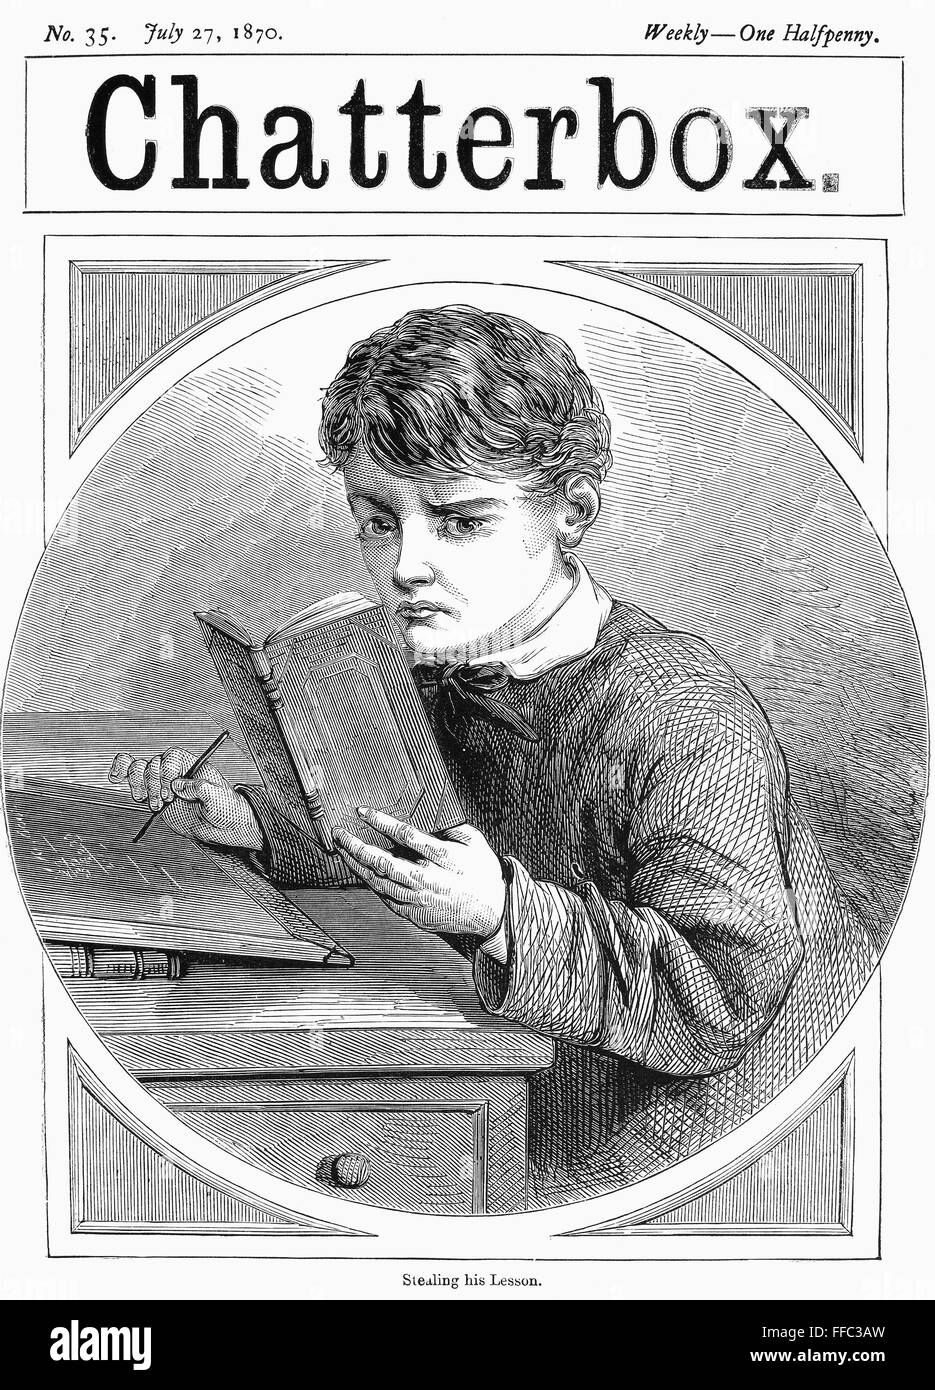 SCHOOLBOY, c1870. /nSchoolboy stealing his lesson. Wood engraving, American, 1870. Stock Photo